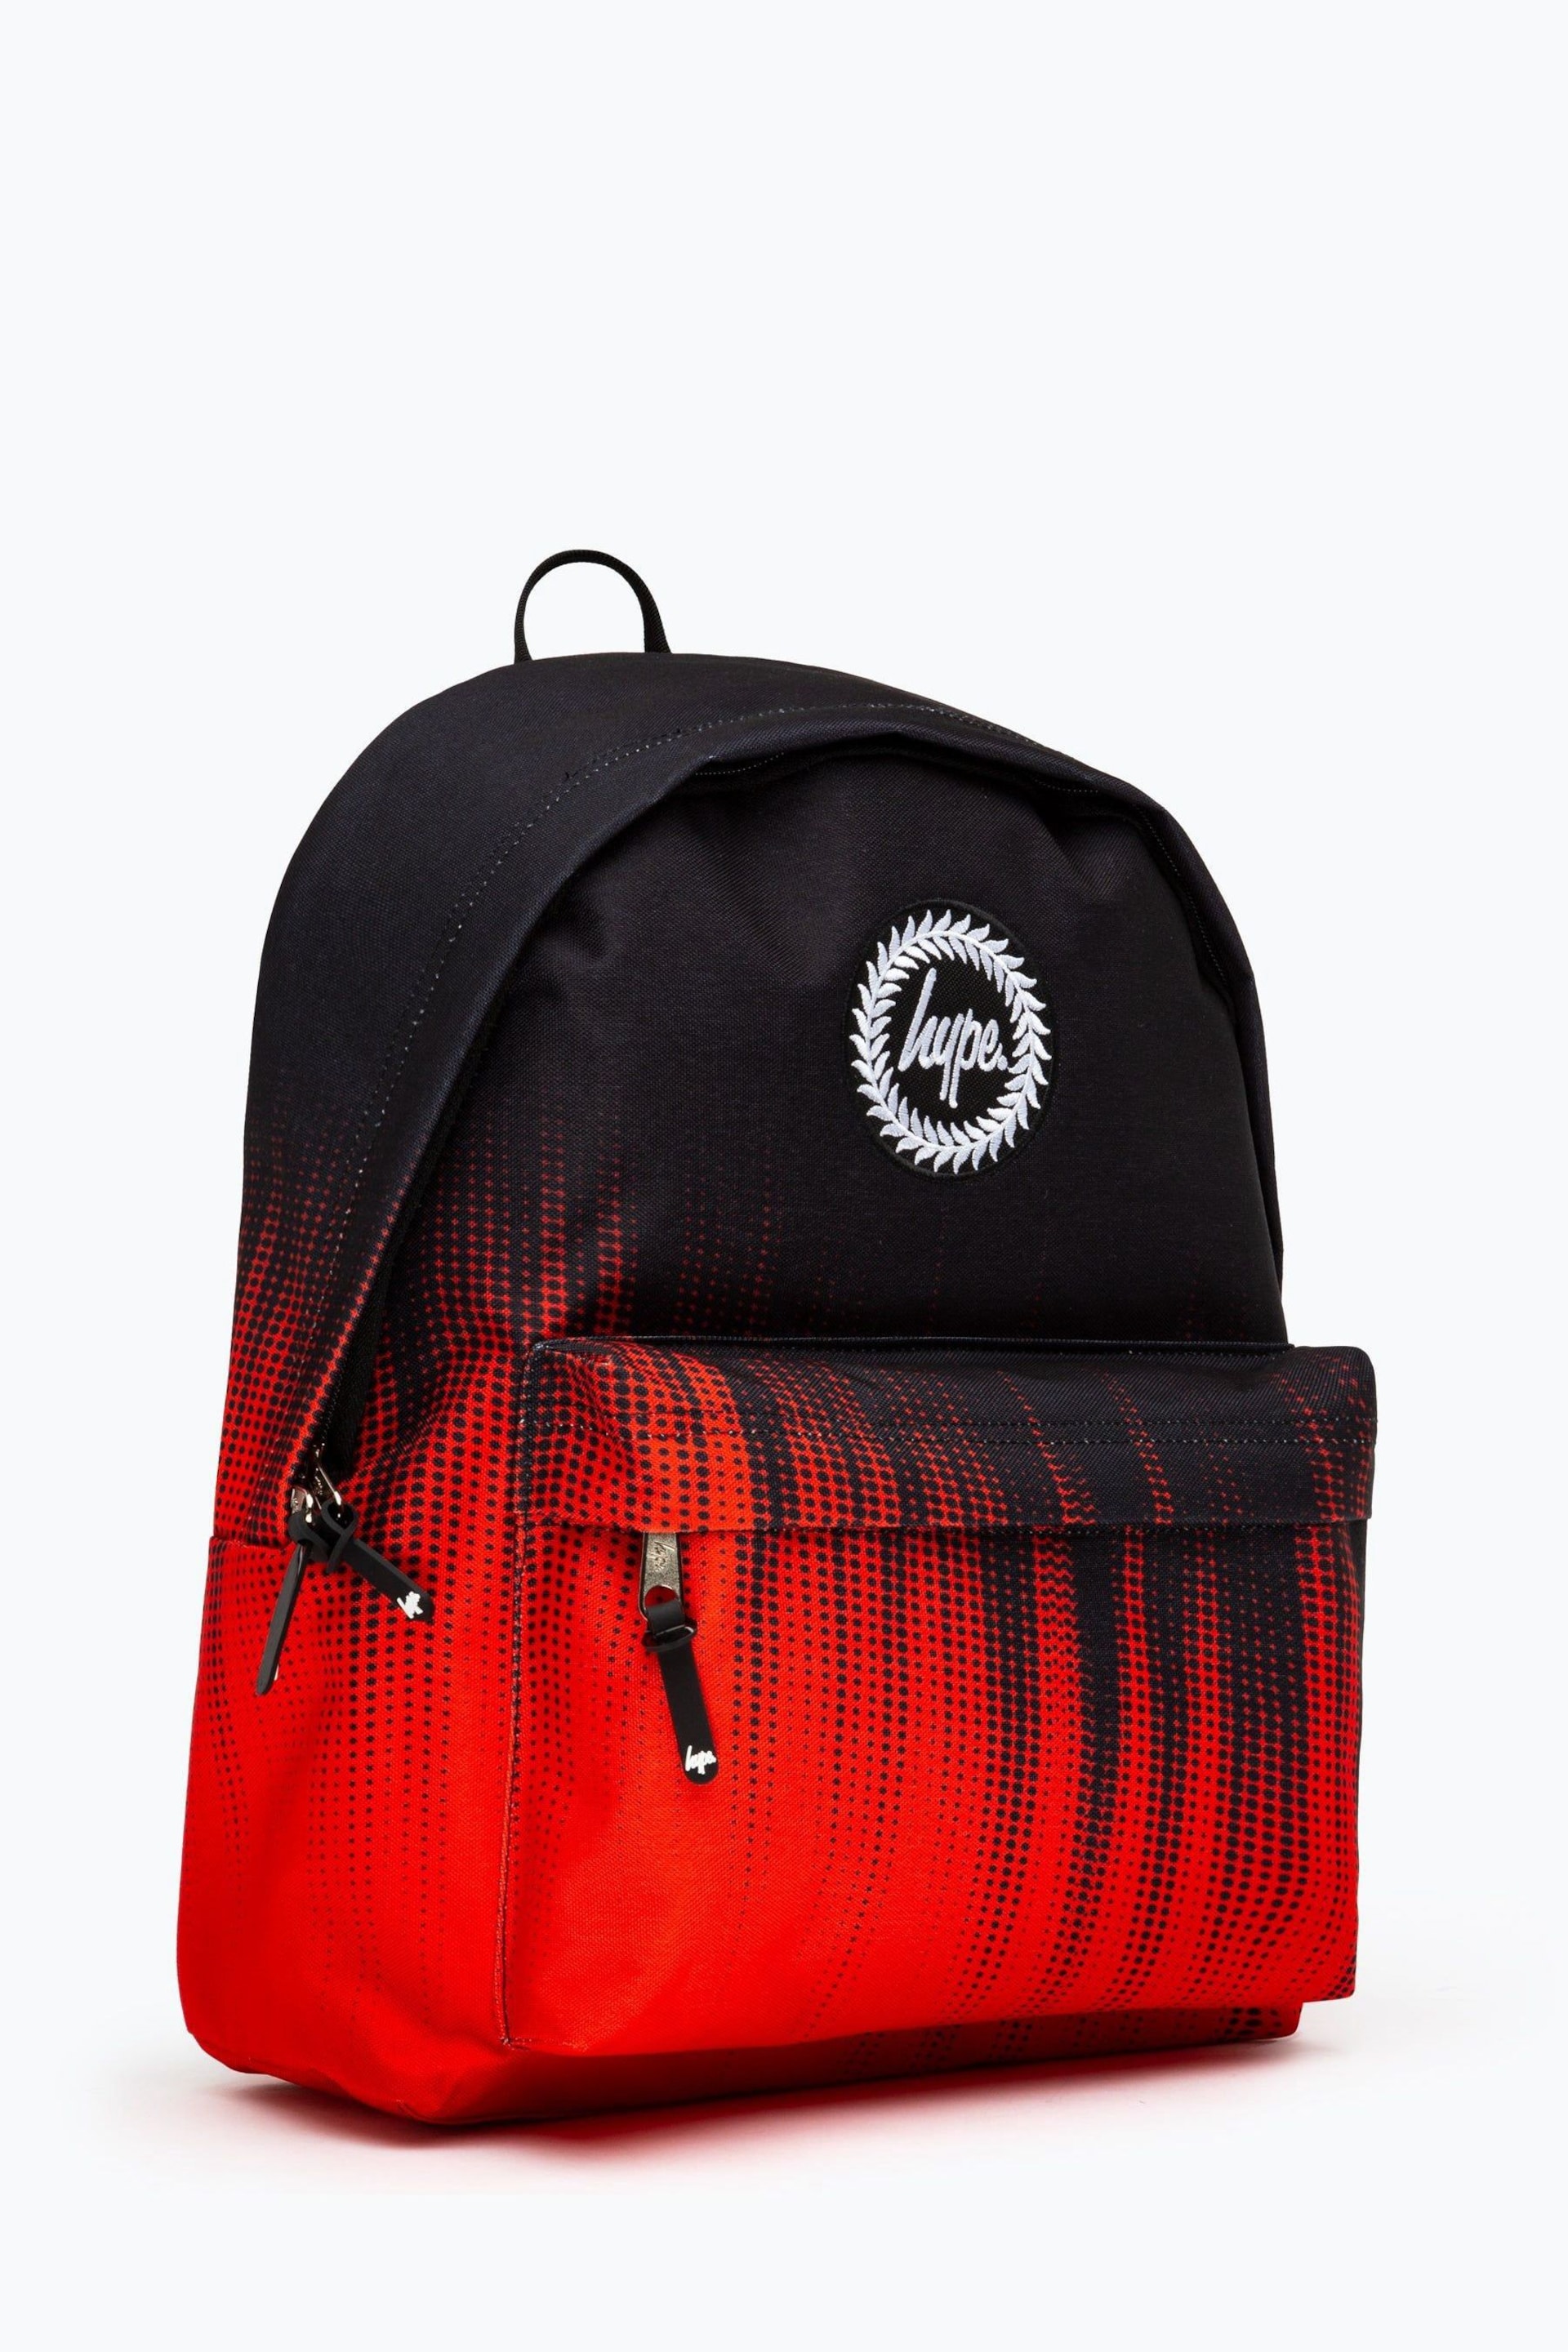 Hype. Red Half Tone Fade Backpack - Image 4 of 8